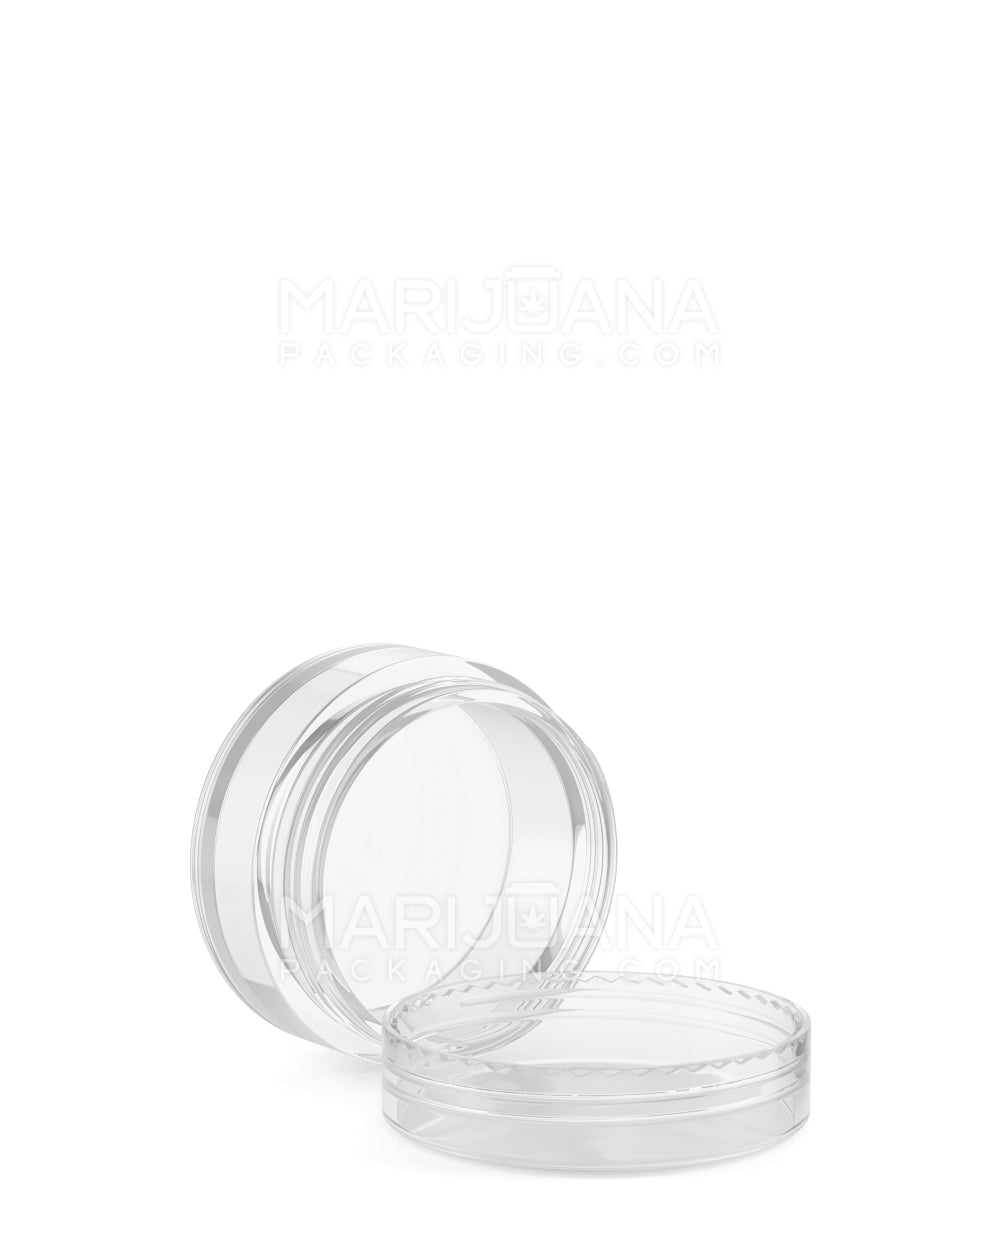 Clear Concentrate Containers w/ Screw Top Cap | 10mL - Plastic - 100 Count - 3